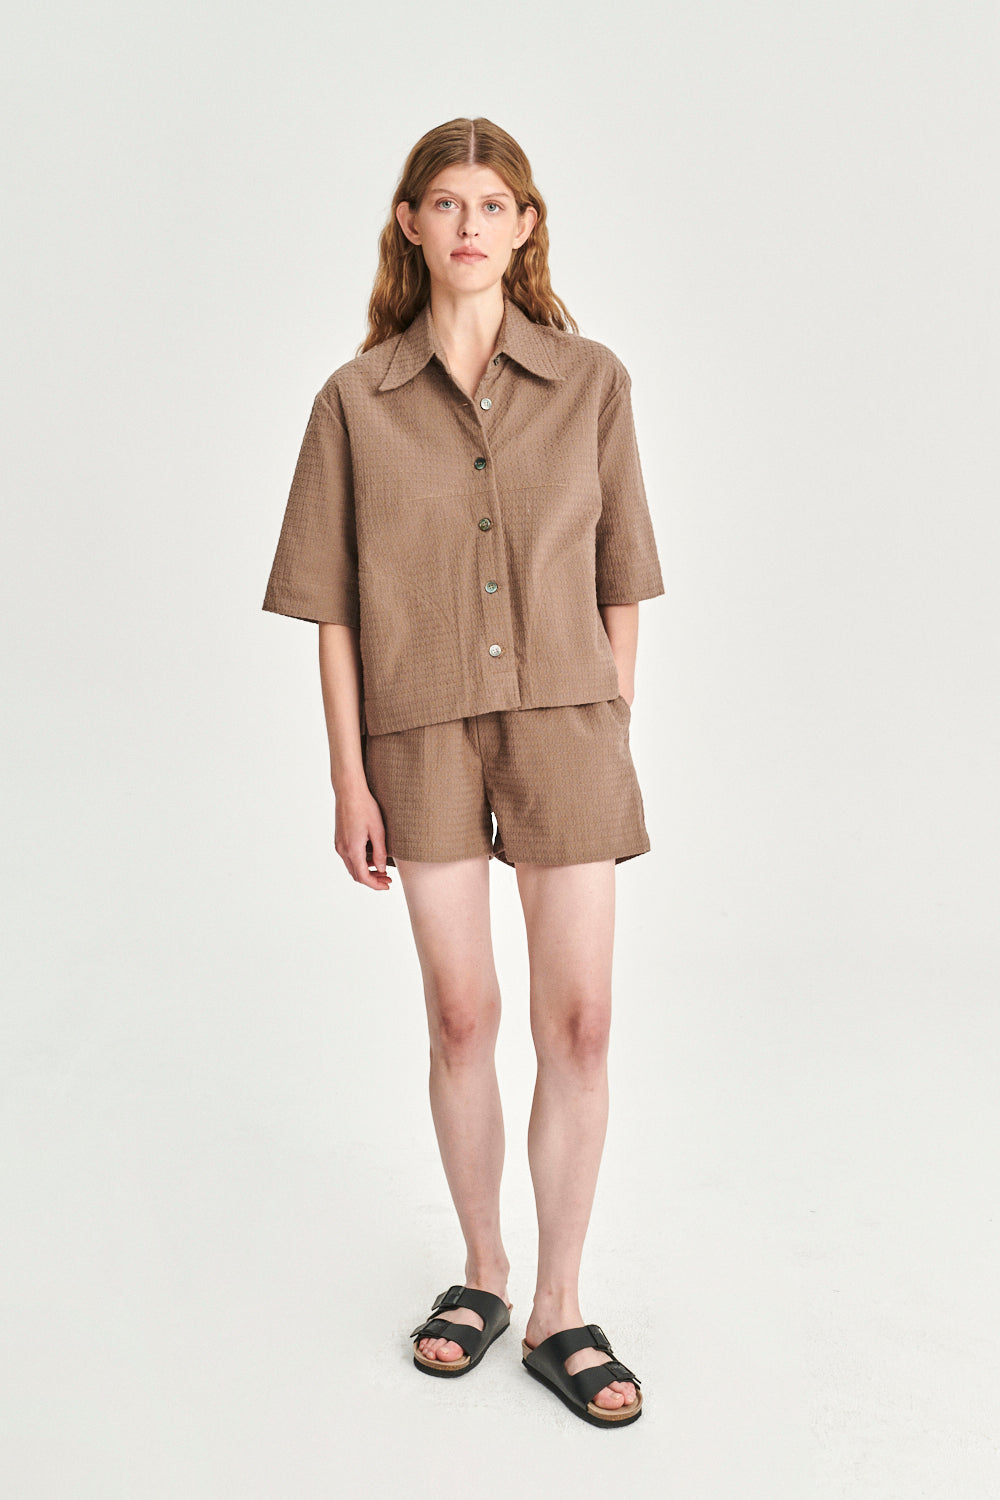 Relaxed Shirt Jacket in a Hazelnut Brown Portuguese Cotton